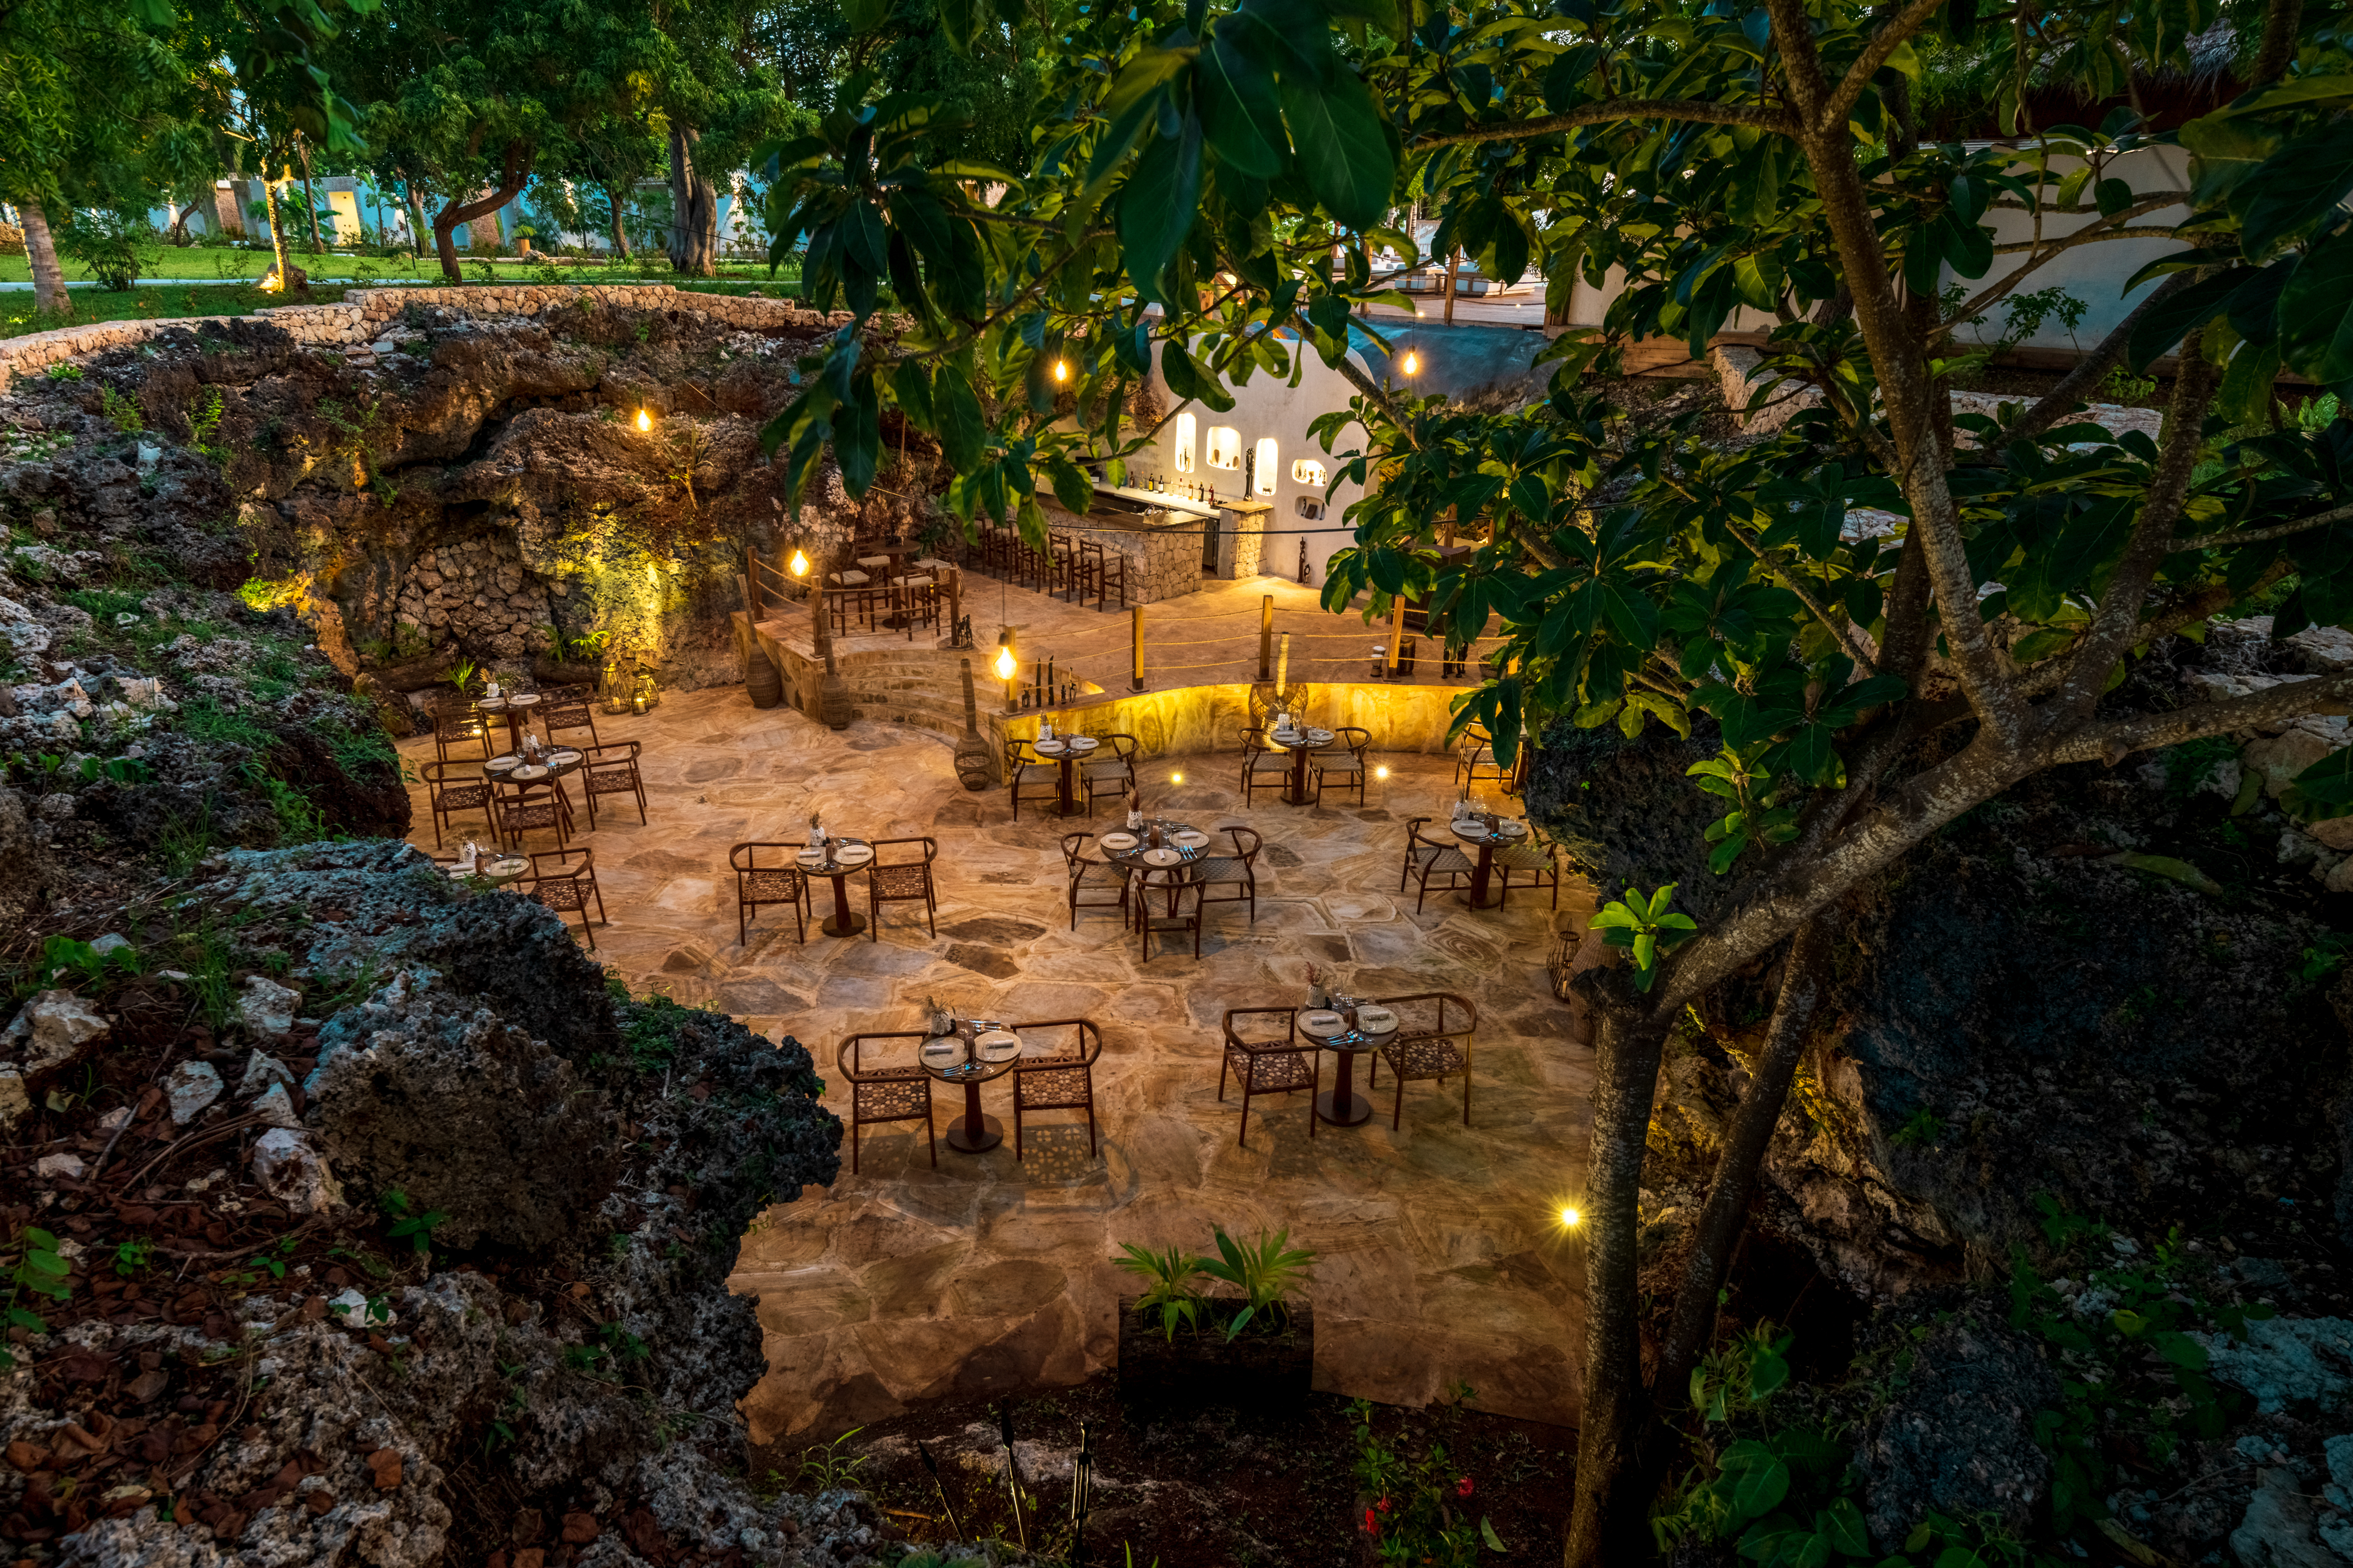 The Cave Restaurant